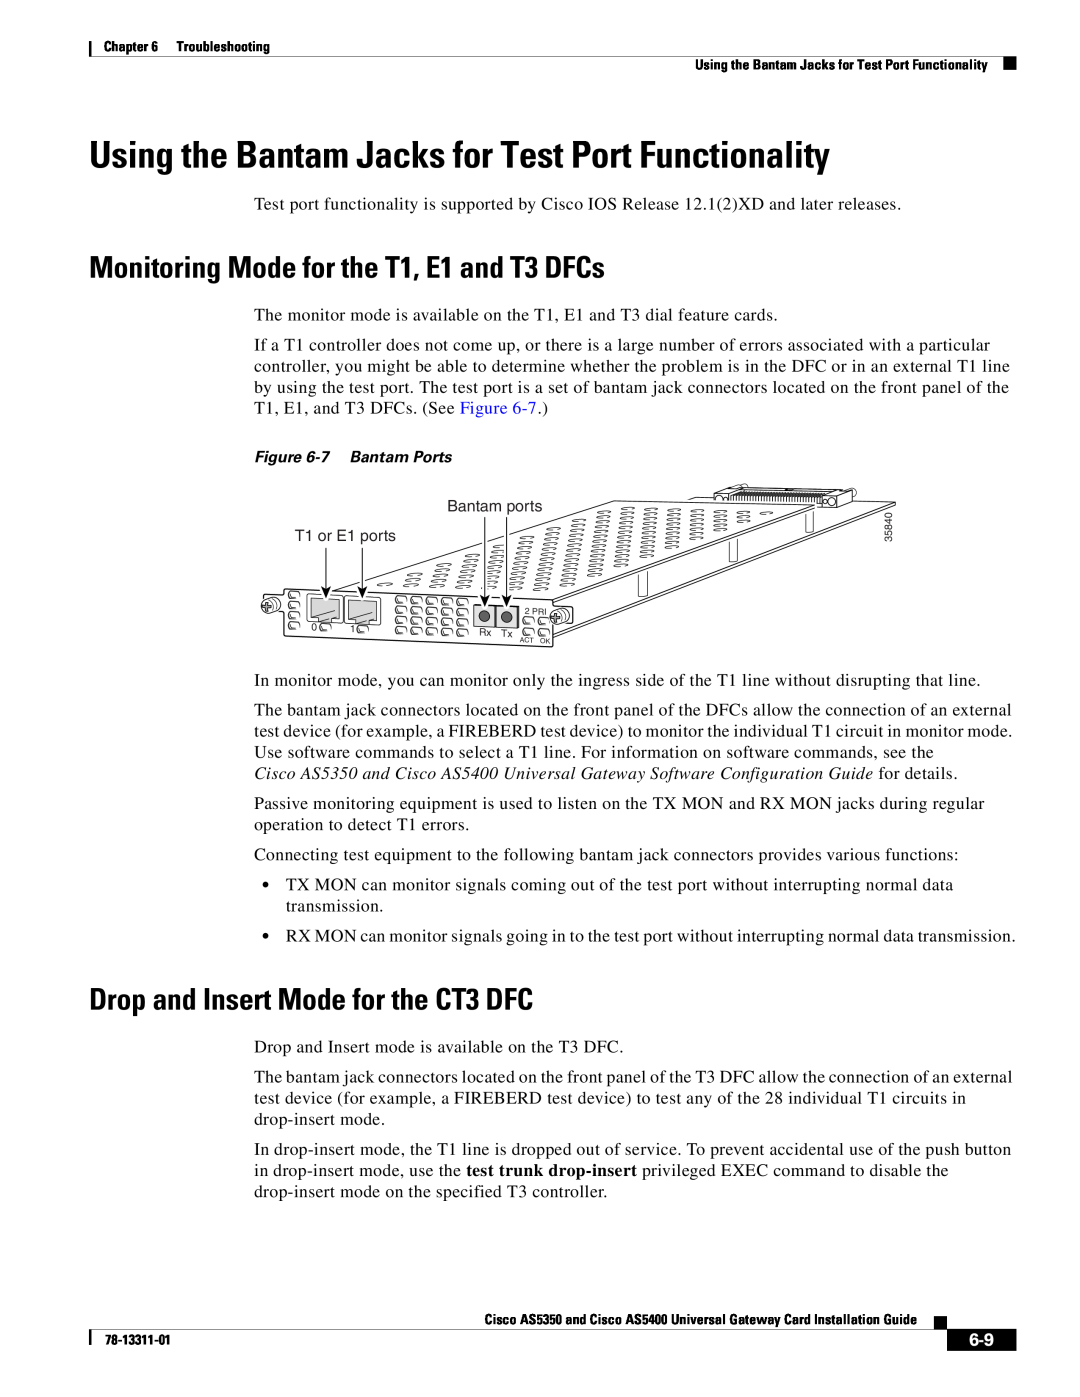 Cisco Systems AS5350 manual Using the Bantam Jacks for Test Port Functionality, Monitoring Mode for the T1, E1 and T3 DFCs 